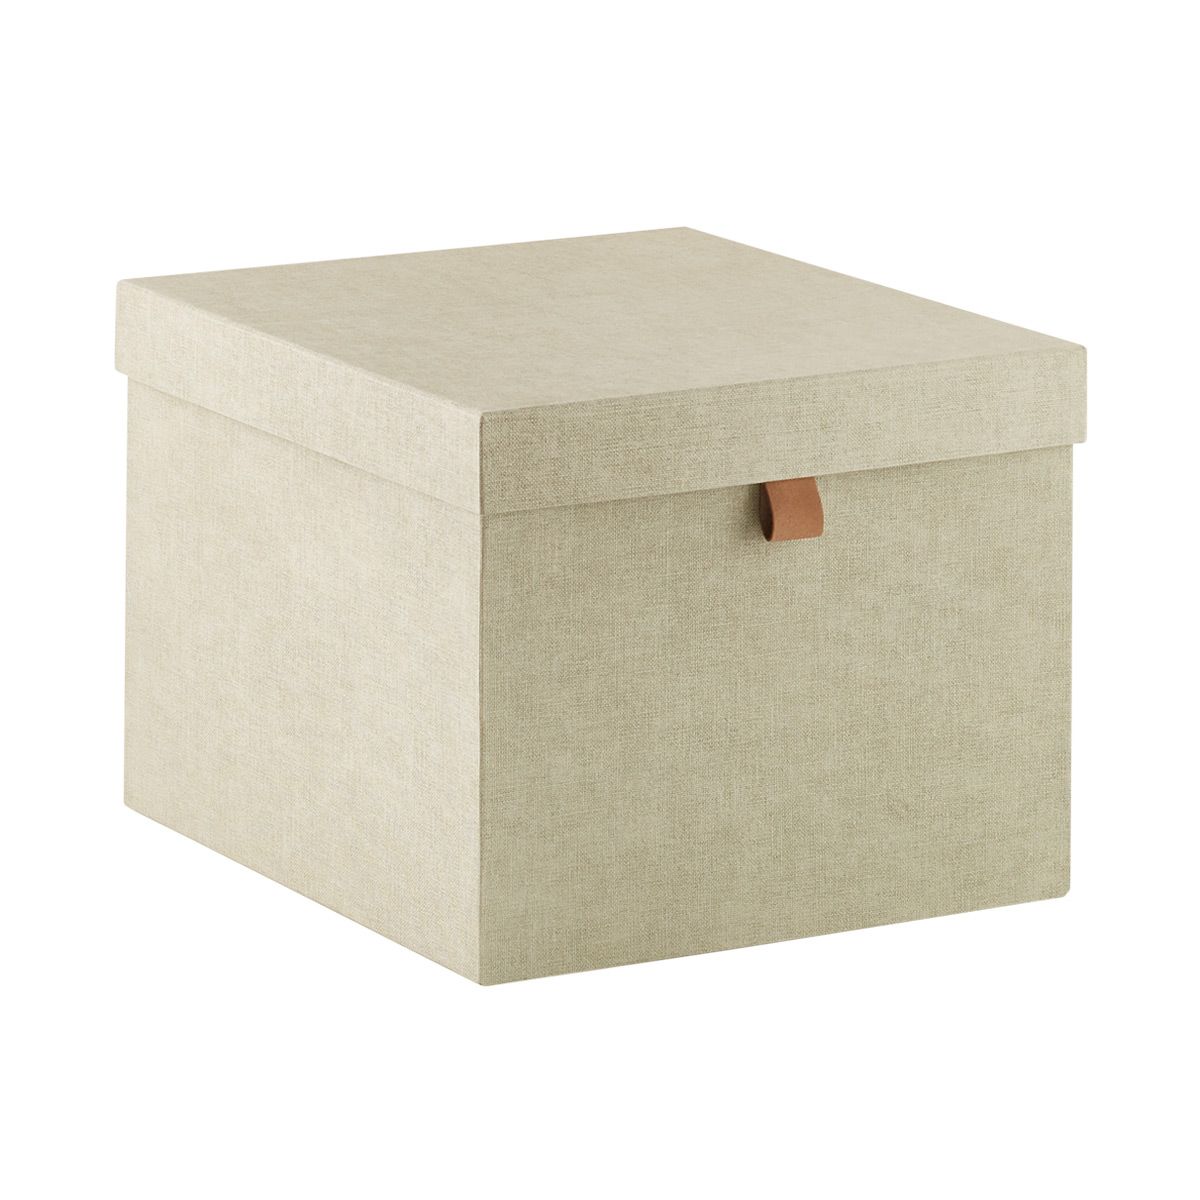 Bigso Marten Large Storage Box Linen | The Container Store